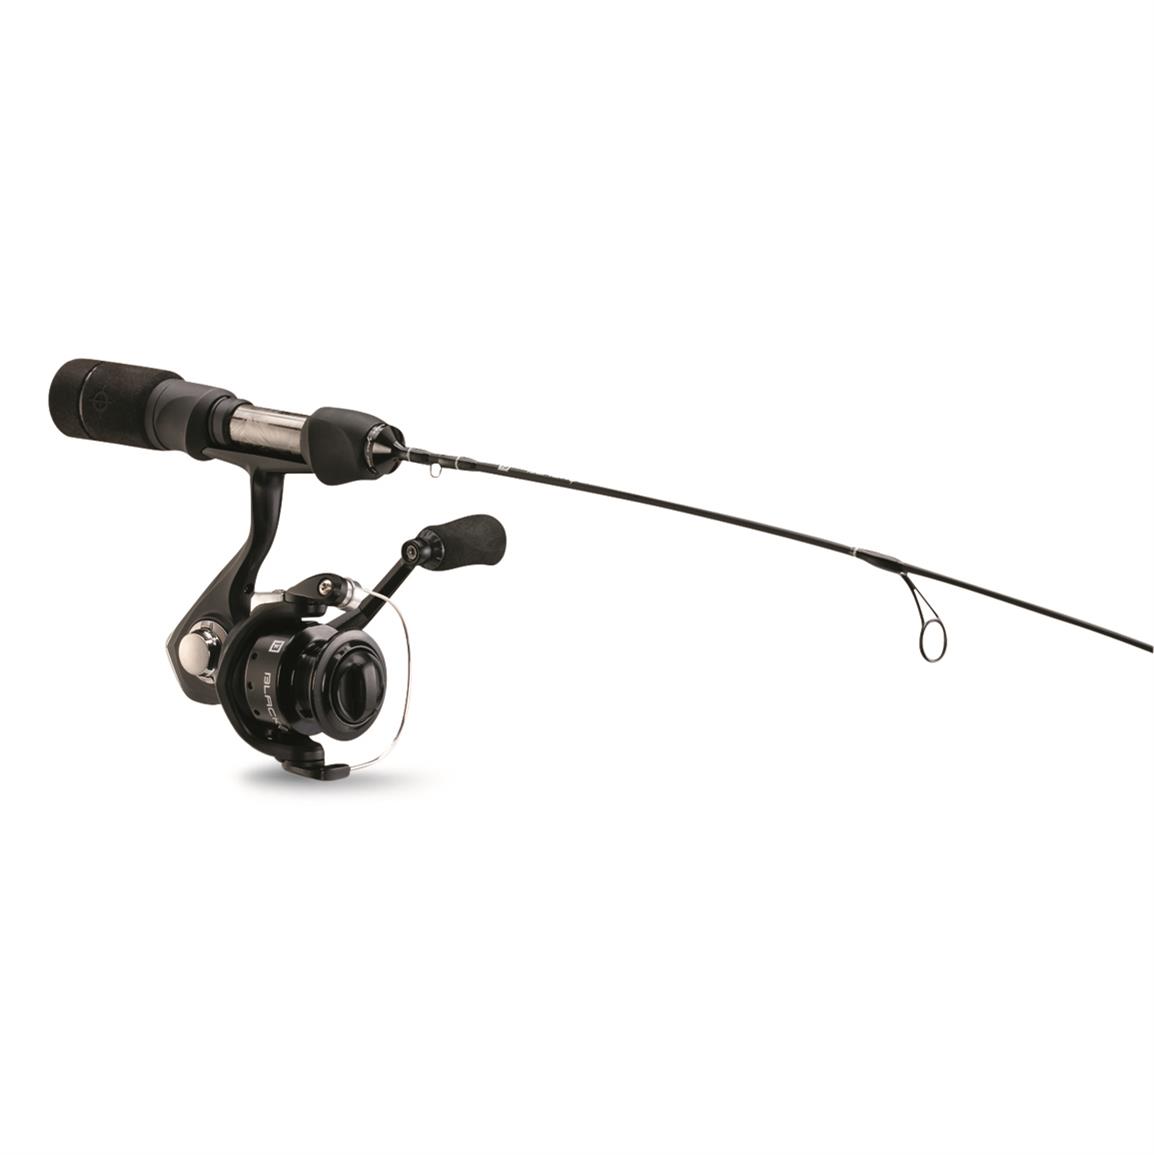 13 Fishing Snitch Pro/FreeFall Ghost Rod and Reel Ice Fishing Combo, 23  Length, Left-Hand Retrieve - 728906, Ice Fishing Combos at Sportsman's Guide